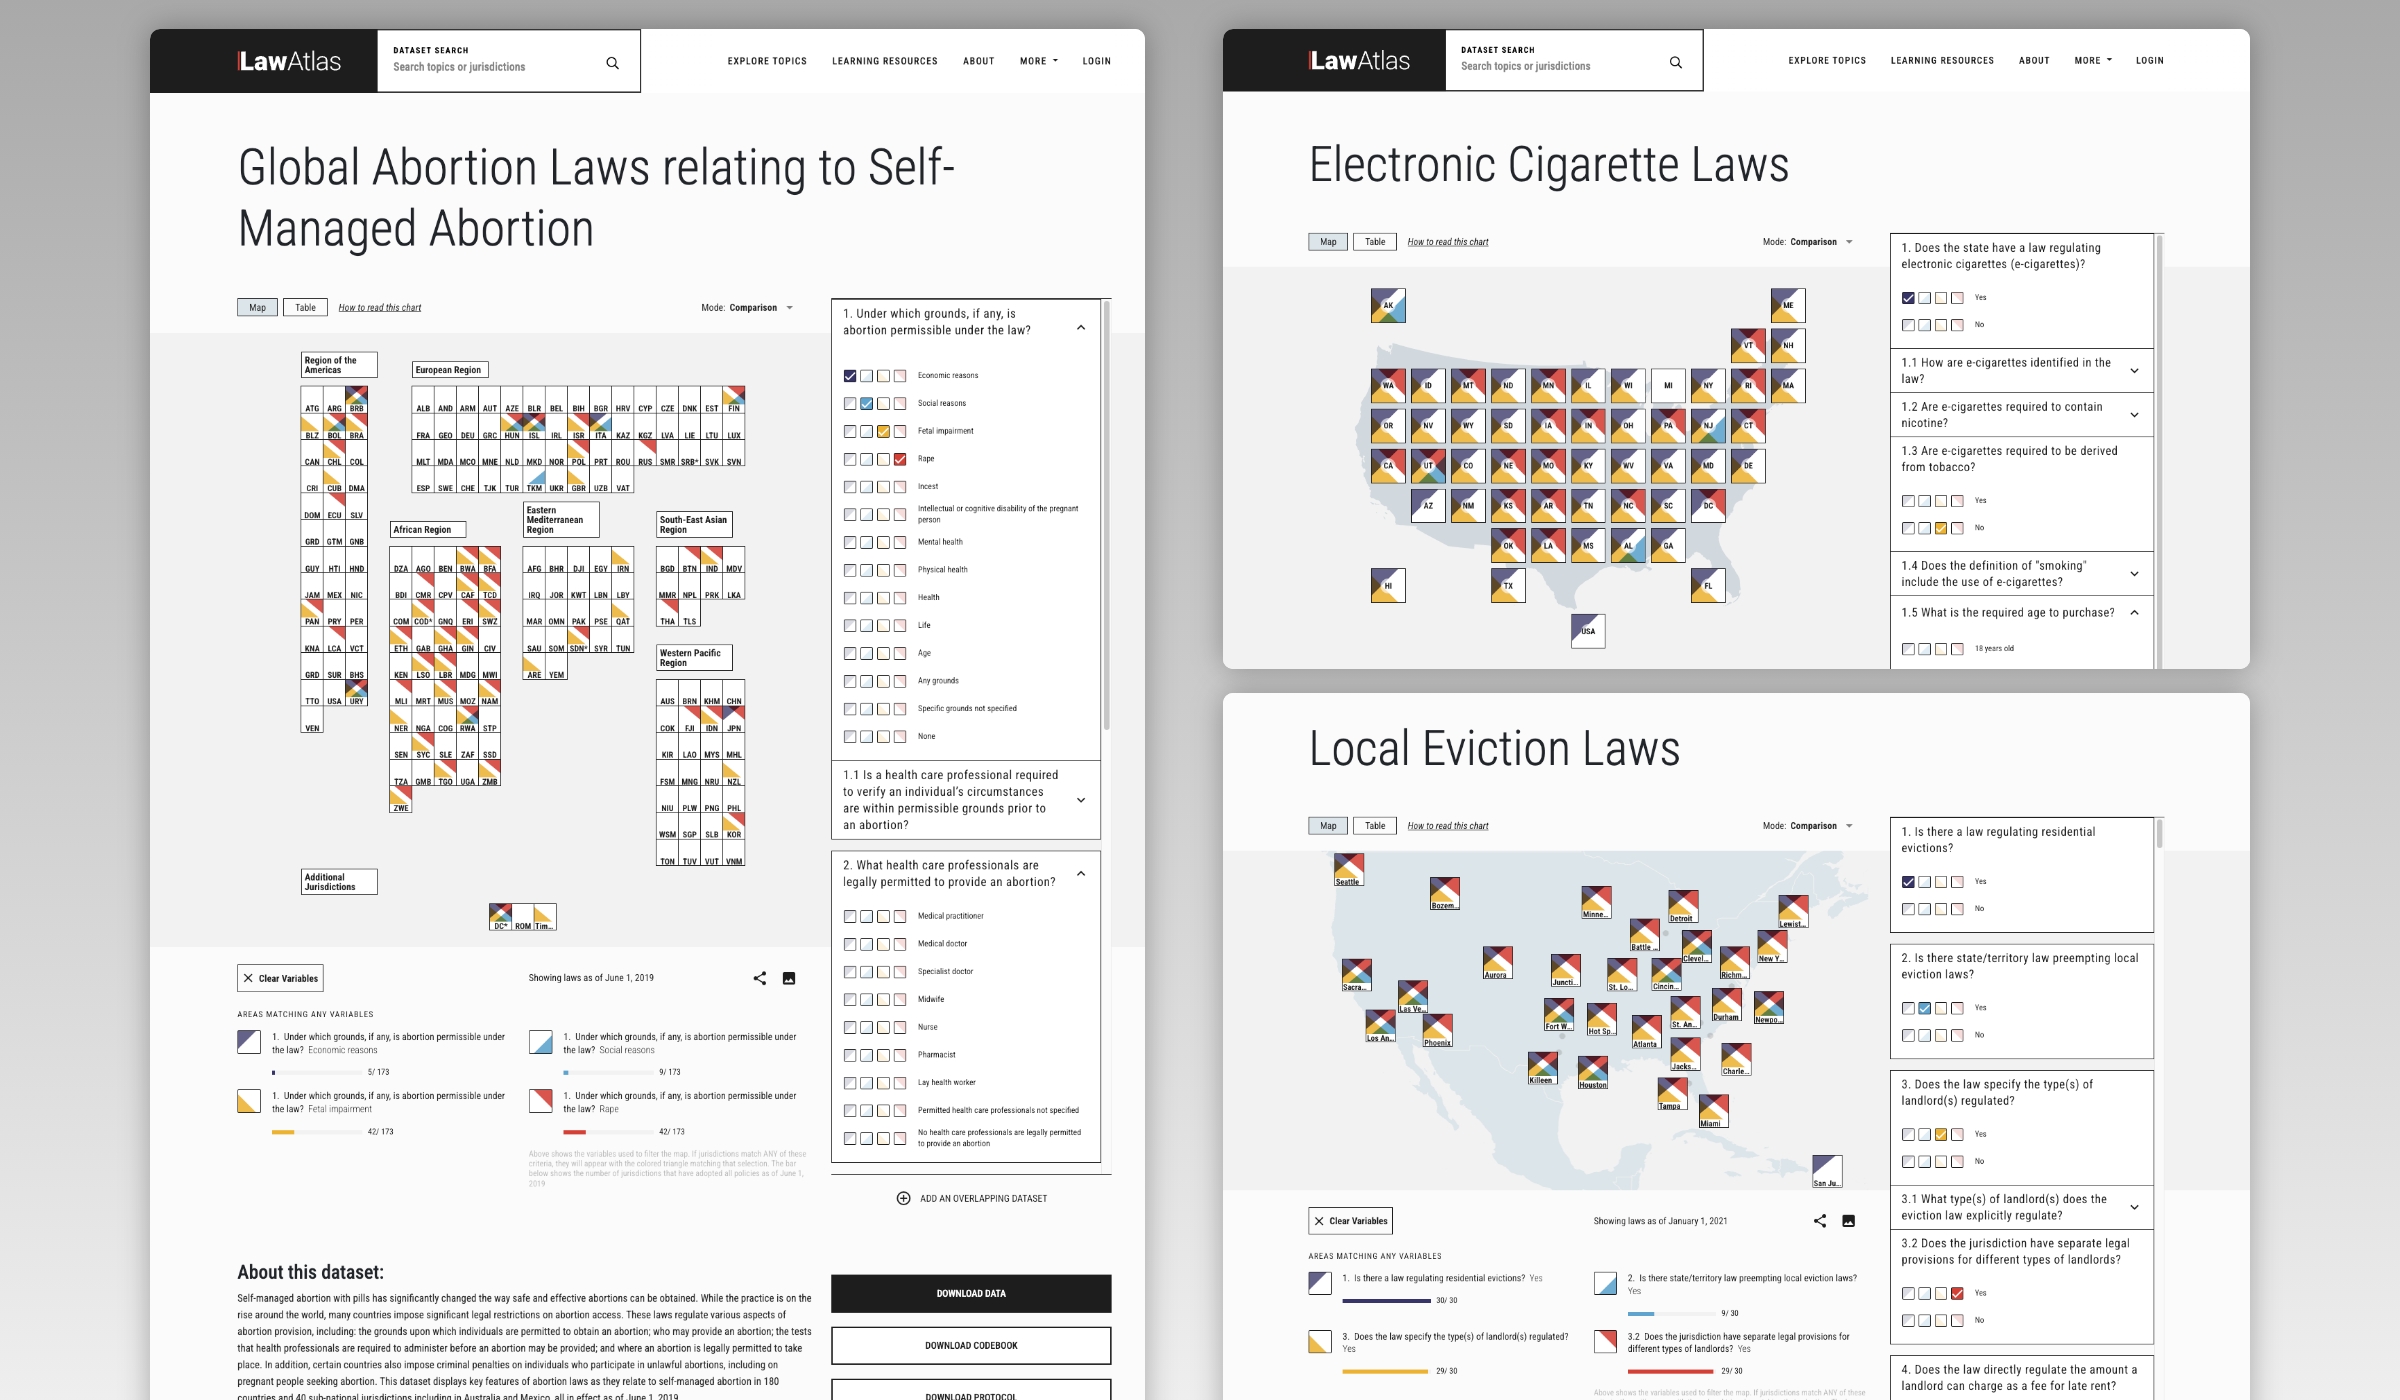 A montage of three different datasets, with different geographies, displayed on three types of maps used on the LawAtlas tool. The first uses a global map to show "Global Abortion Laws Relating to Self-Managed Abortion." The second uses the US tile map to show the "Electronic Cigarette Laws" dataset, and the third uses a local map to show "Local Eviction Laws."